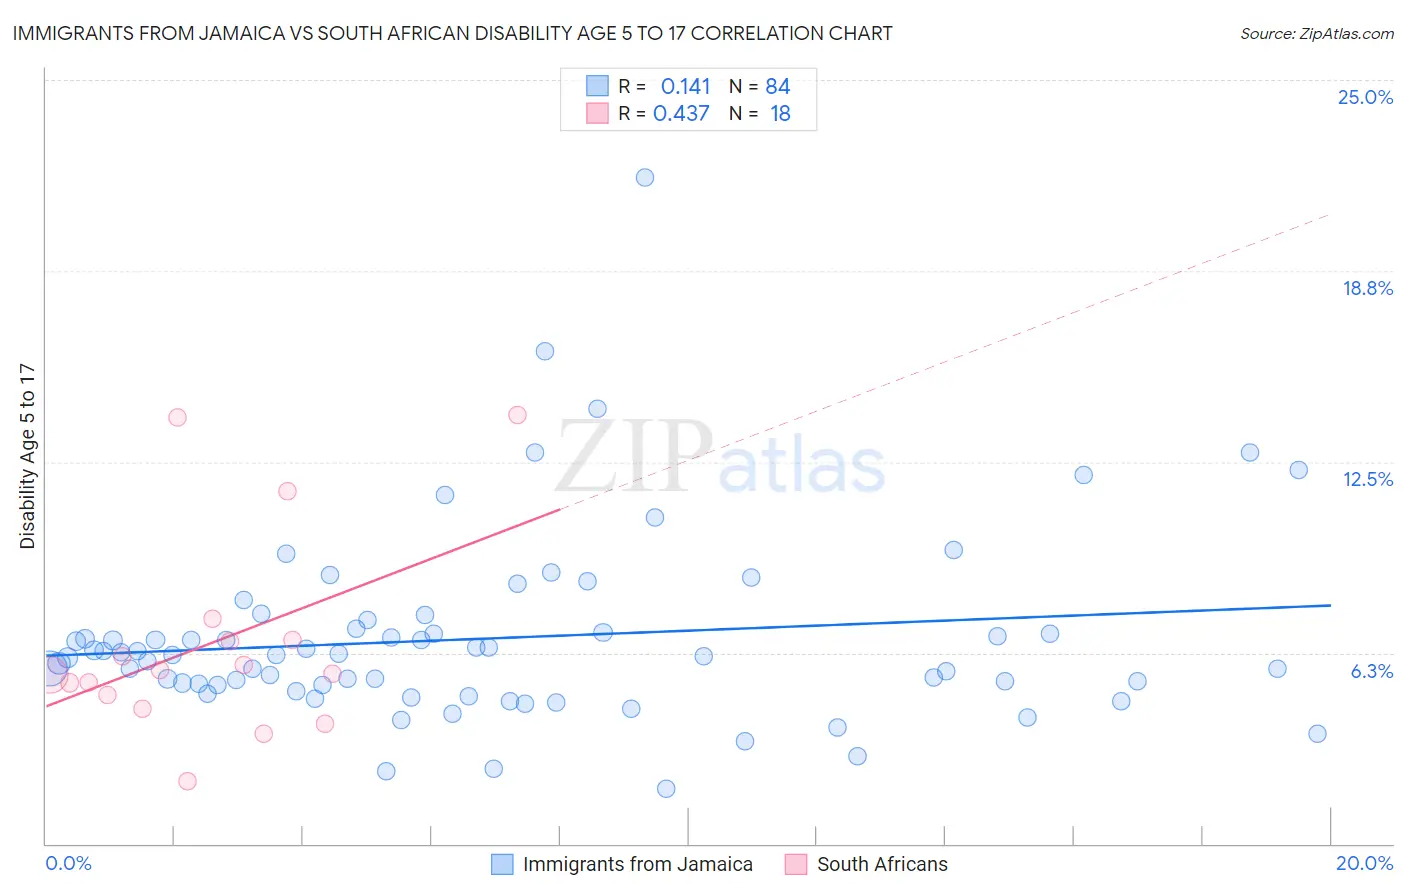 Immigrants from Jamaica vs South African Disability Age 5 to 17